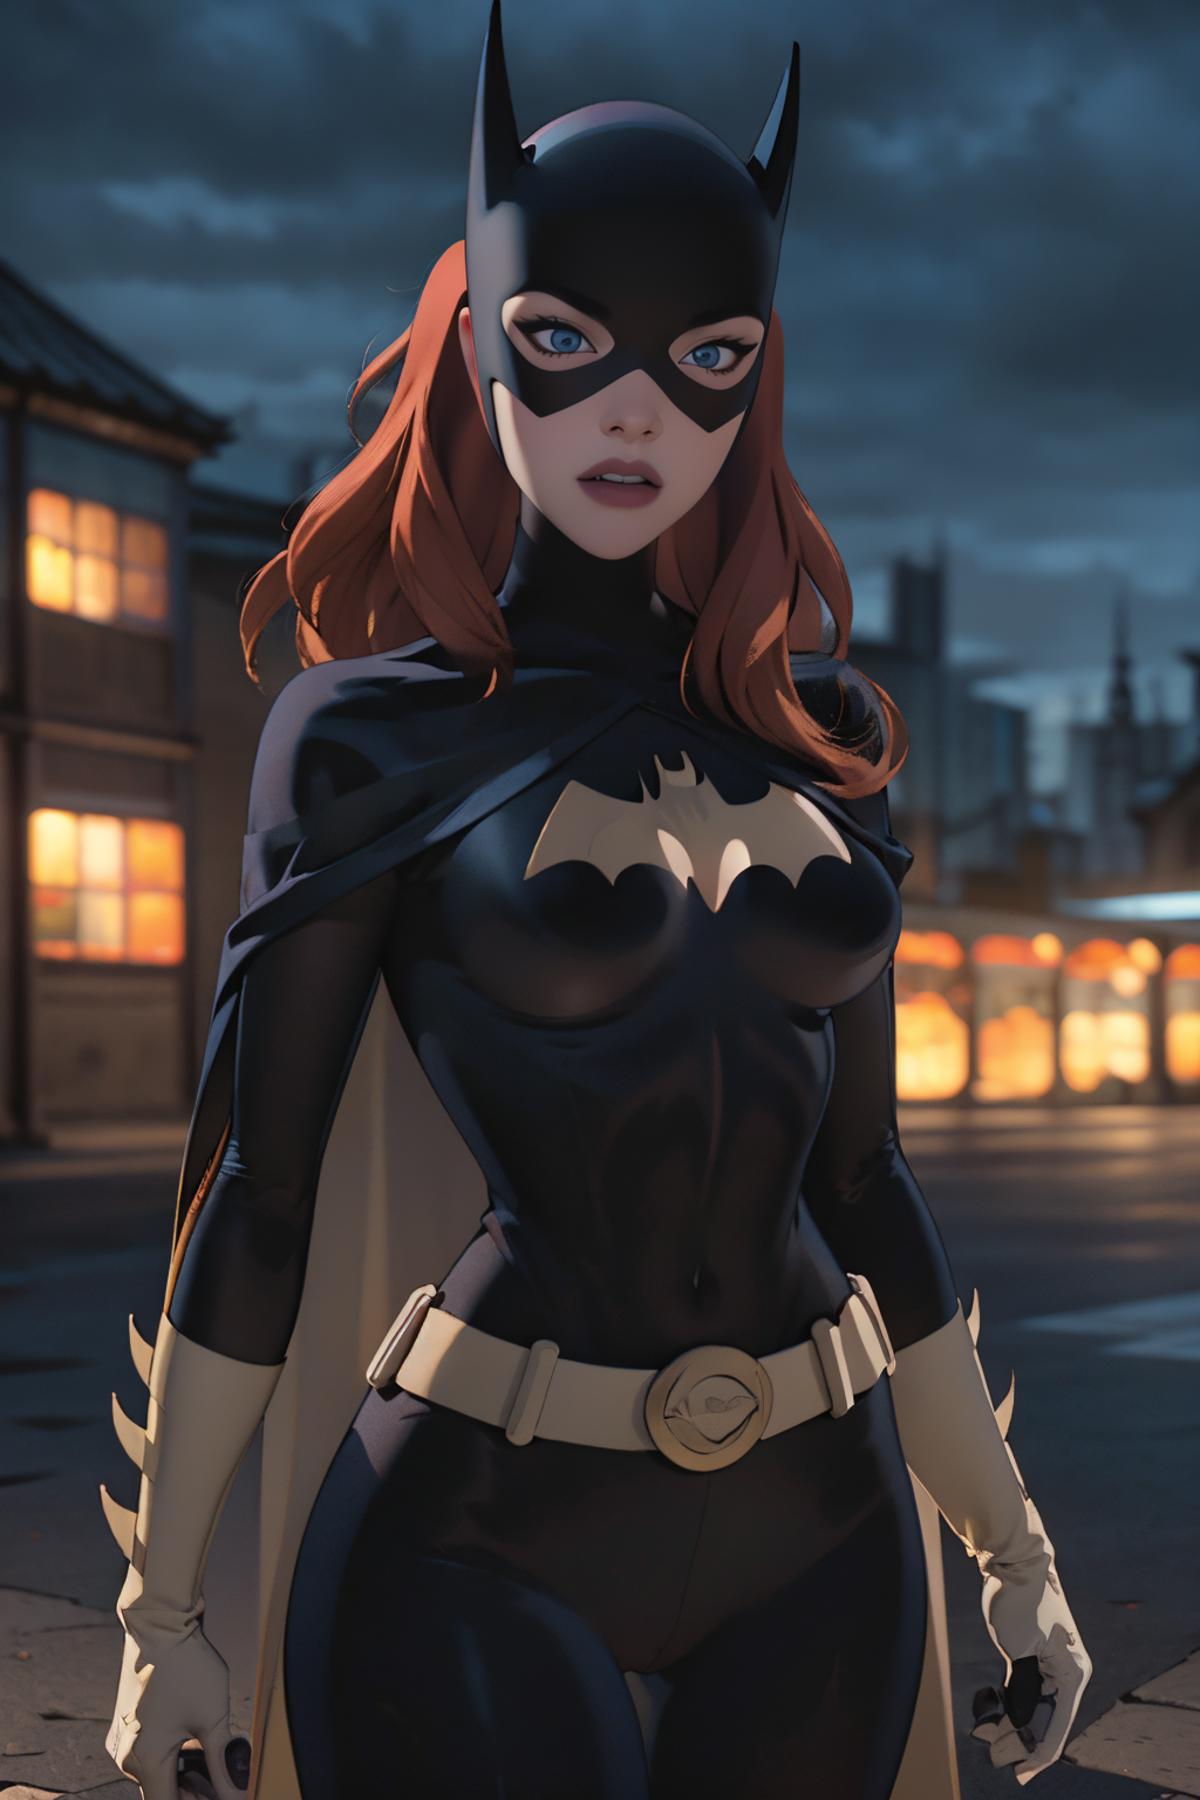 A red-haired Batwoman with a gold belt stands in a dark alley.